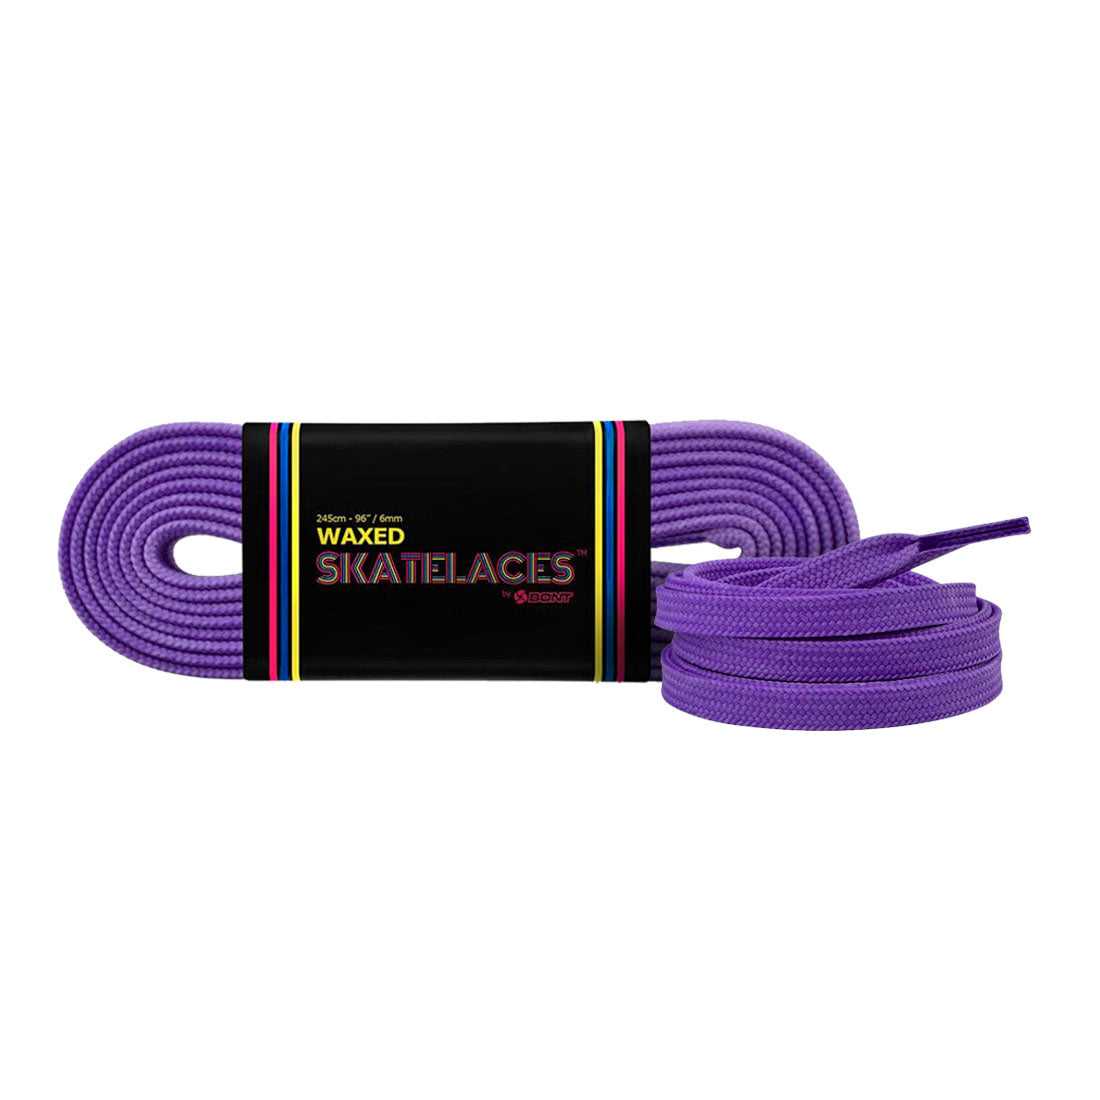 Bont Waxed 6mm Laces - 200cm/79in Dare You Purple Laces